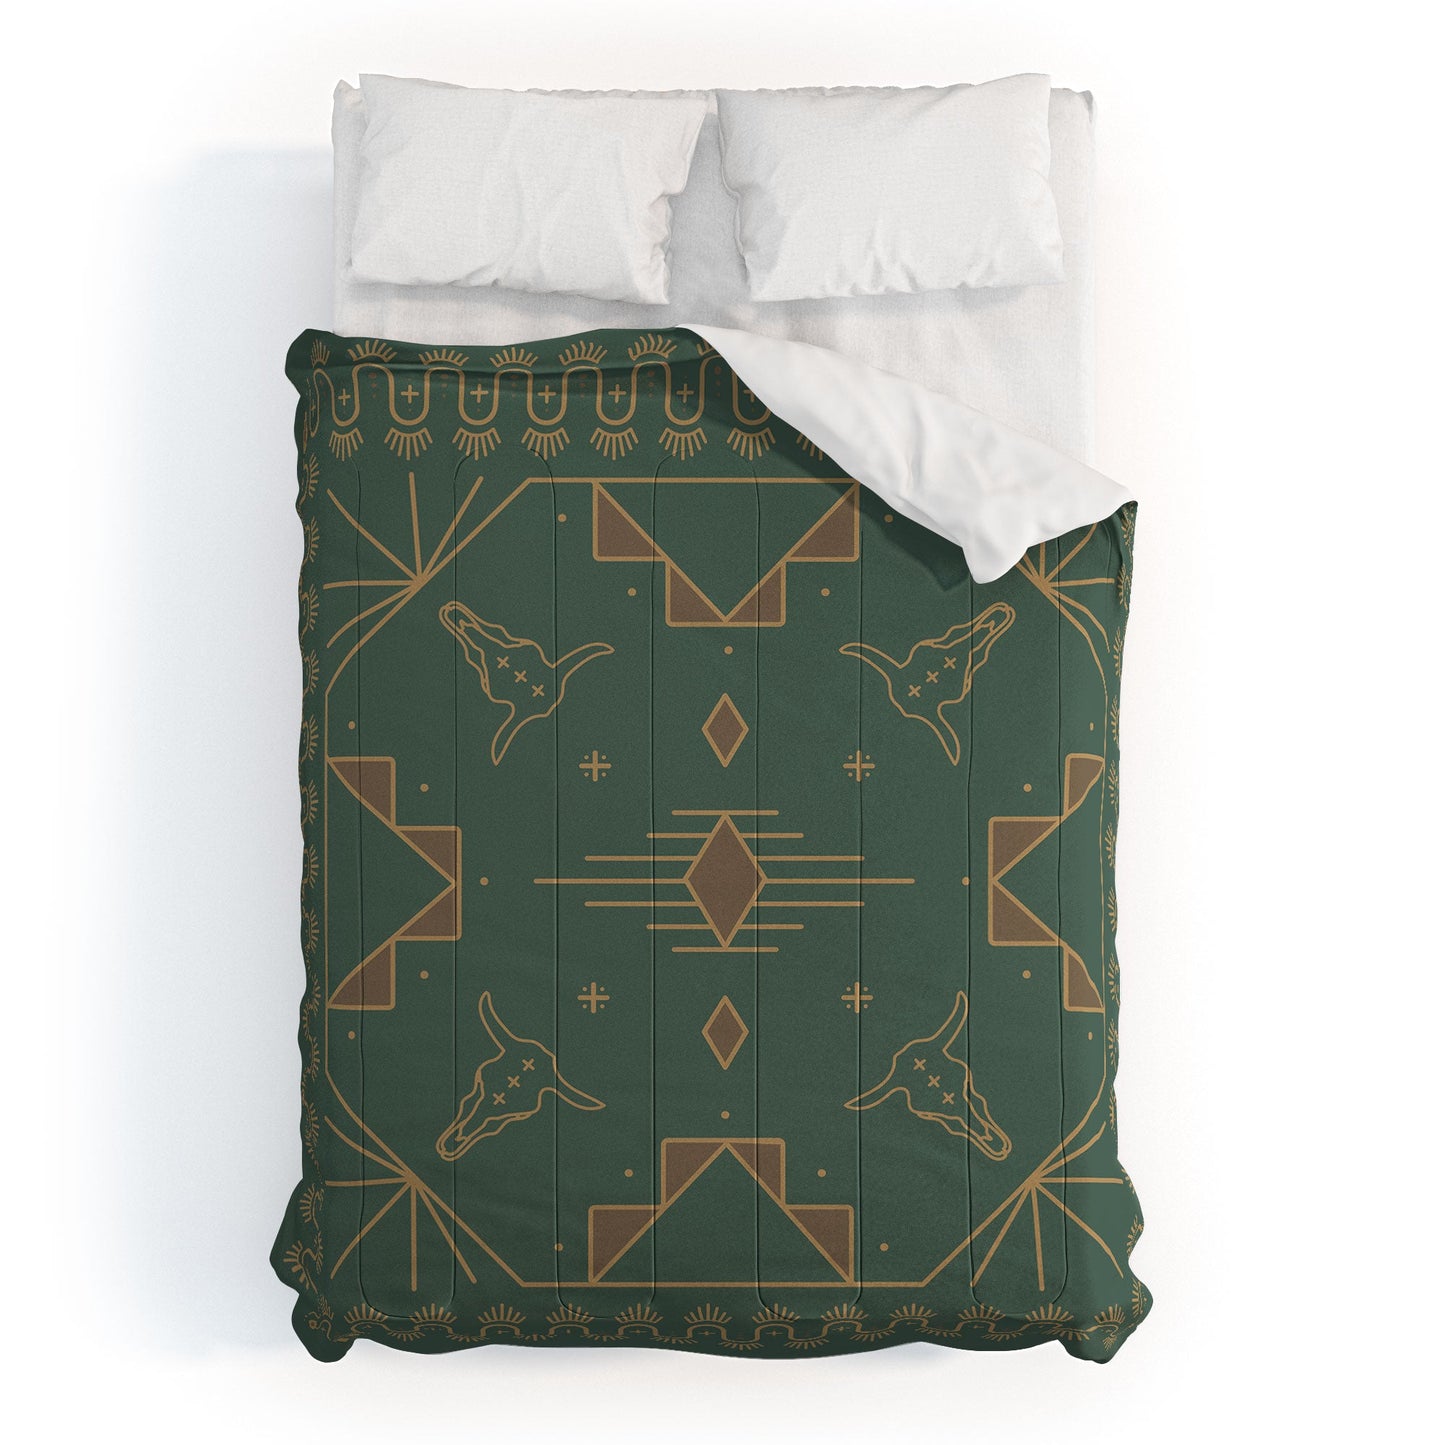 Lost Desert Comforter - aztec, bedding, beddinng, bedspread, blanket, bullhead, comforter, cover, cowgirl, cowgirl style, cowgirlstyle, decor, duvet, home decor, homedecor, ranch, southwestern, western, western bedding, western decor, western home decor, westernbedding, westerndecor, westernhomedecor -  - Baha Ranch Western Wear